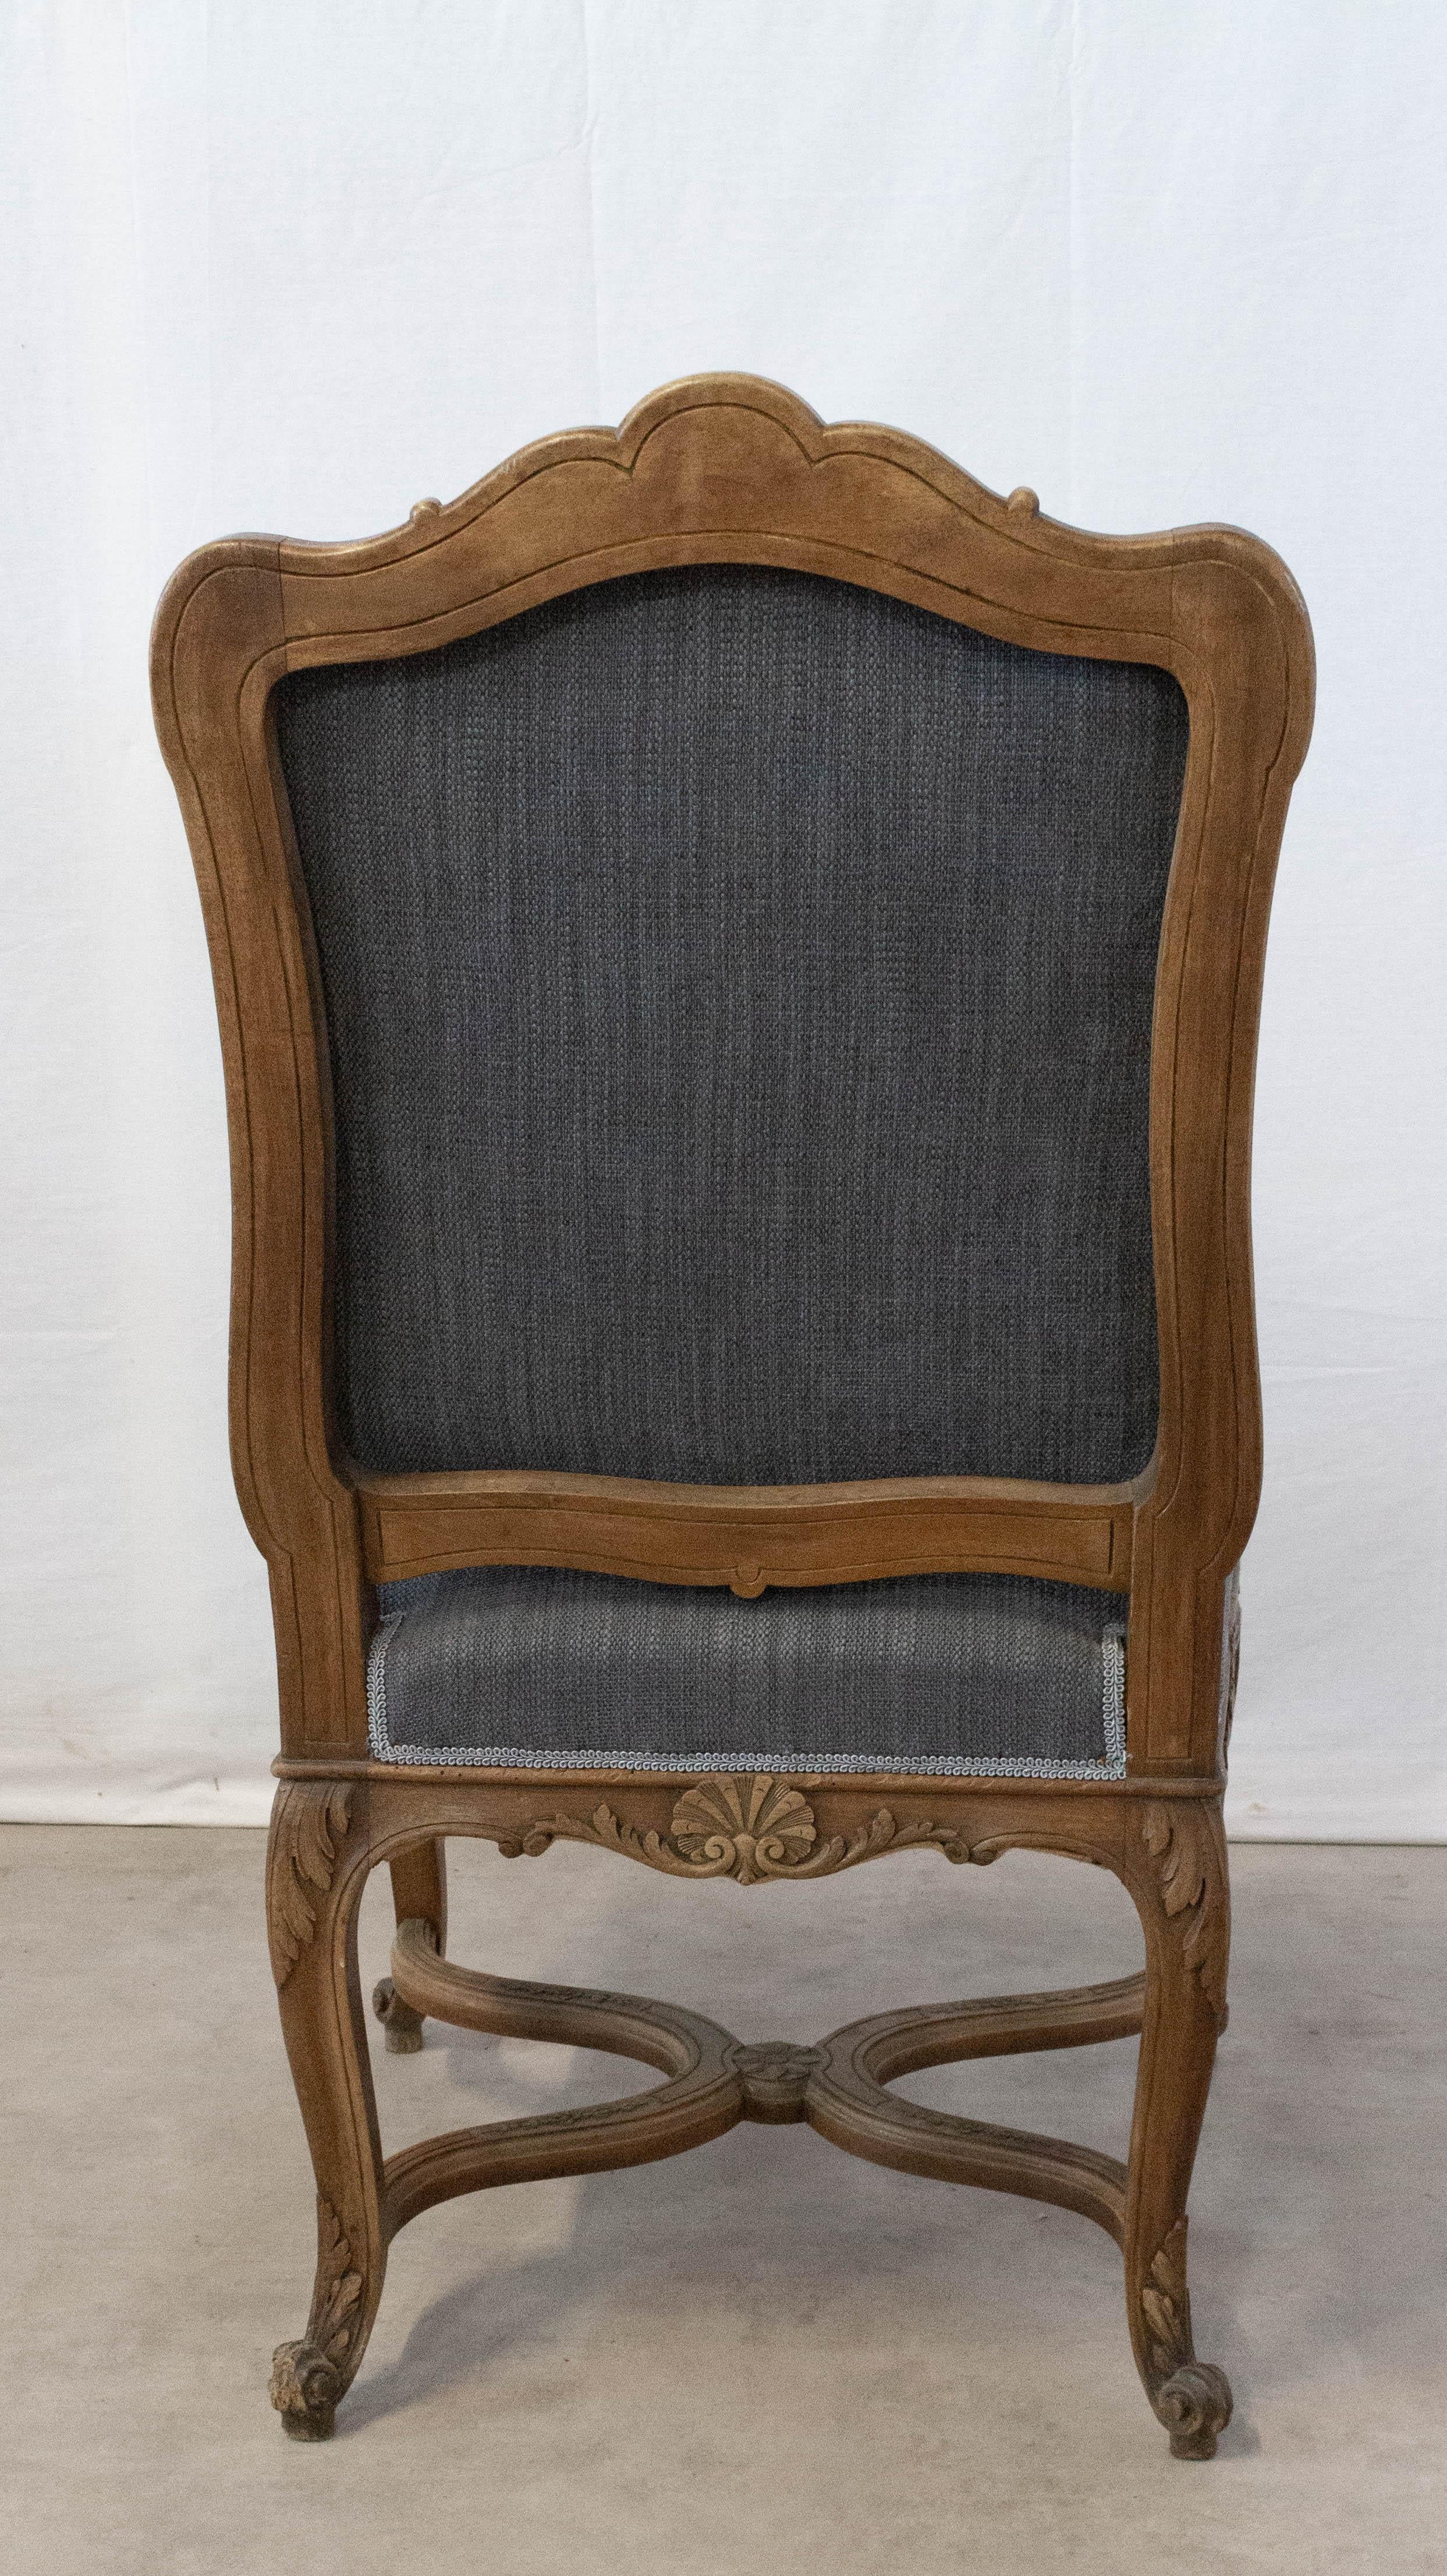 19th Century Pair of Regency Chairs or Fauteuils to be Re-Upholstered Midcentury For Sale